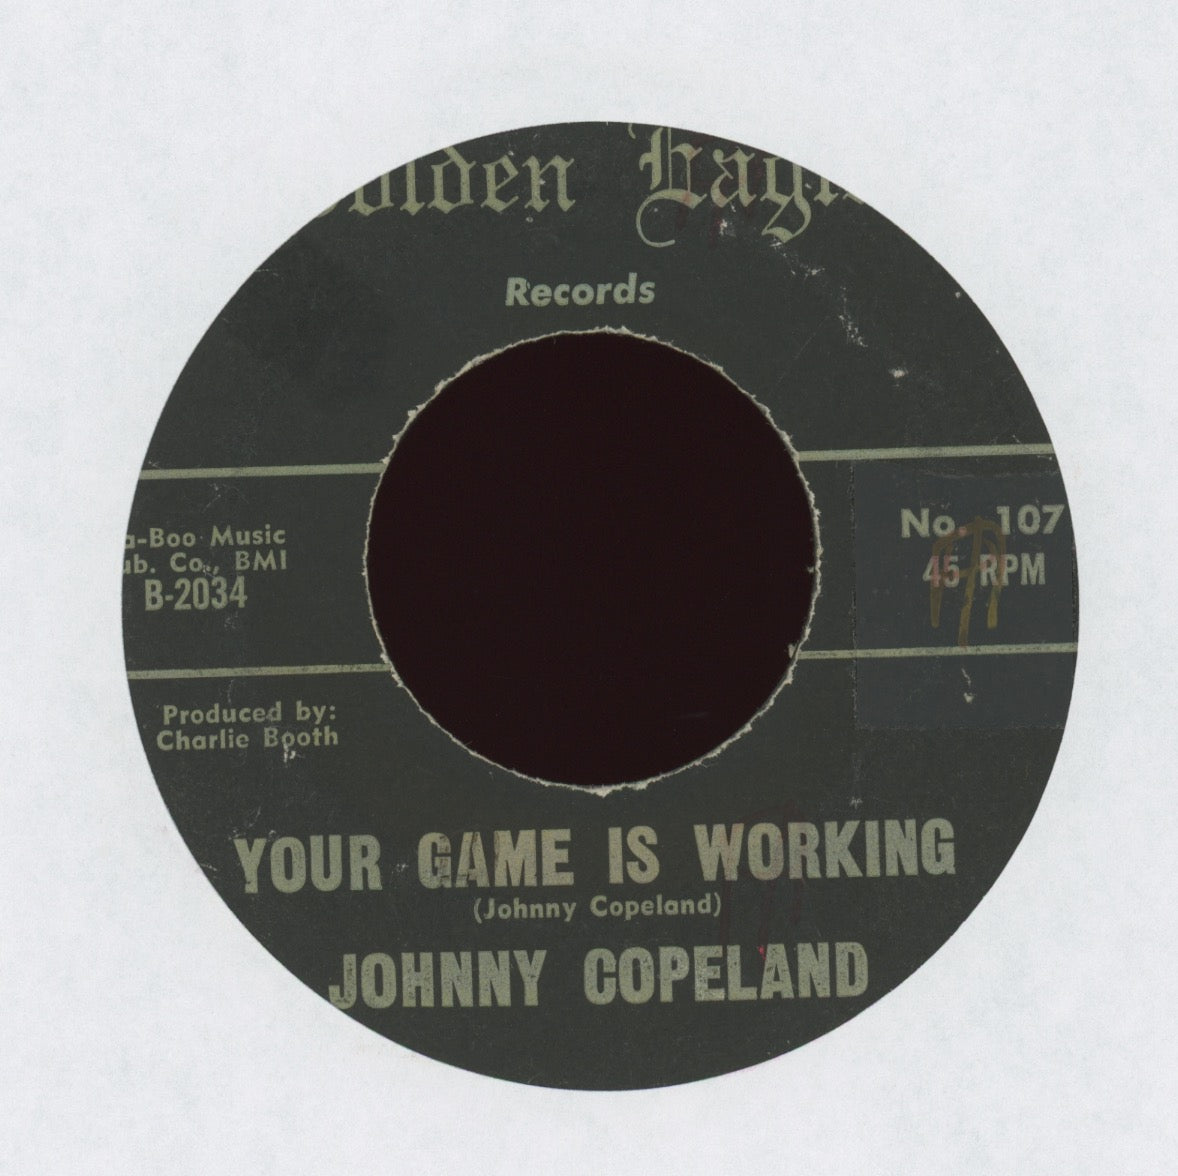 Johnny Copeland - Your Game Is Working on Golden Eagle